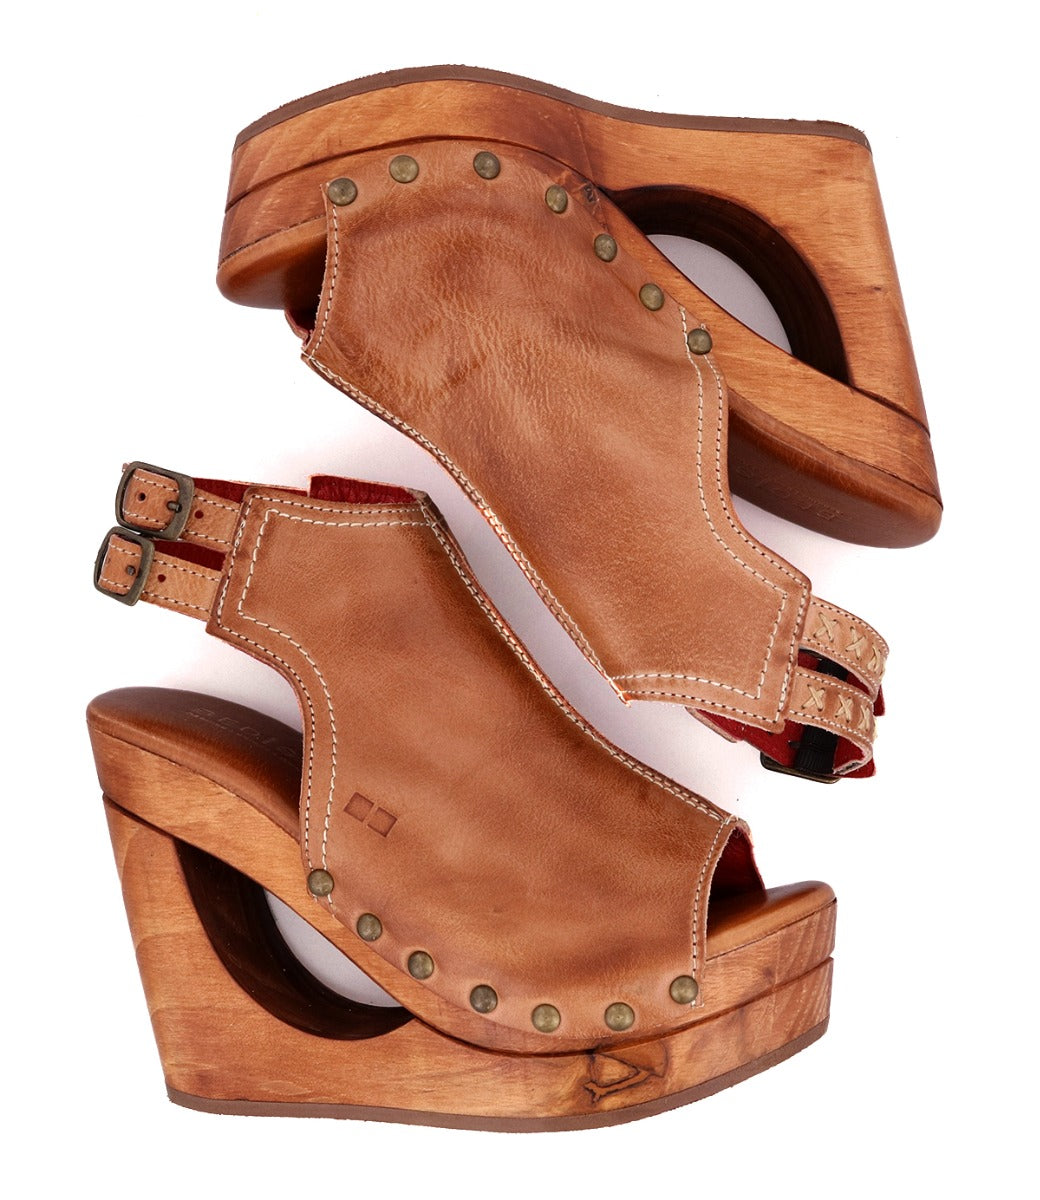 A pair of Imelda wooden sandals with a Bed Stu wooden heel.